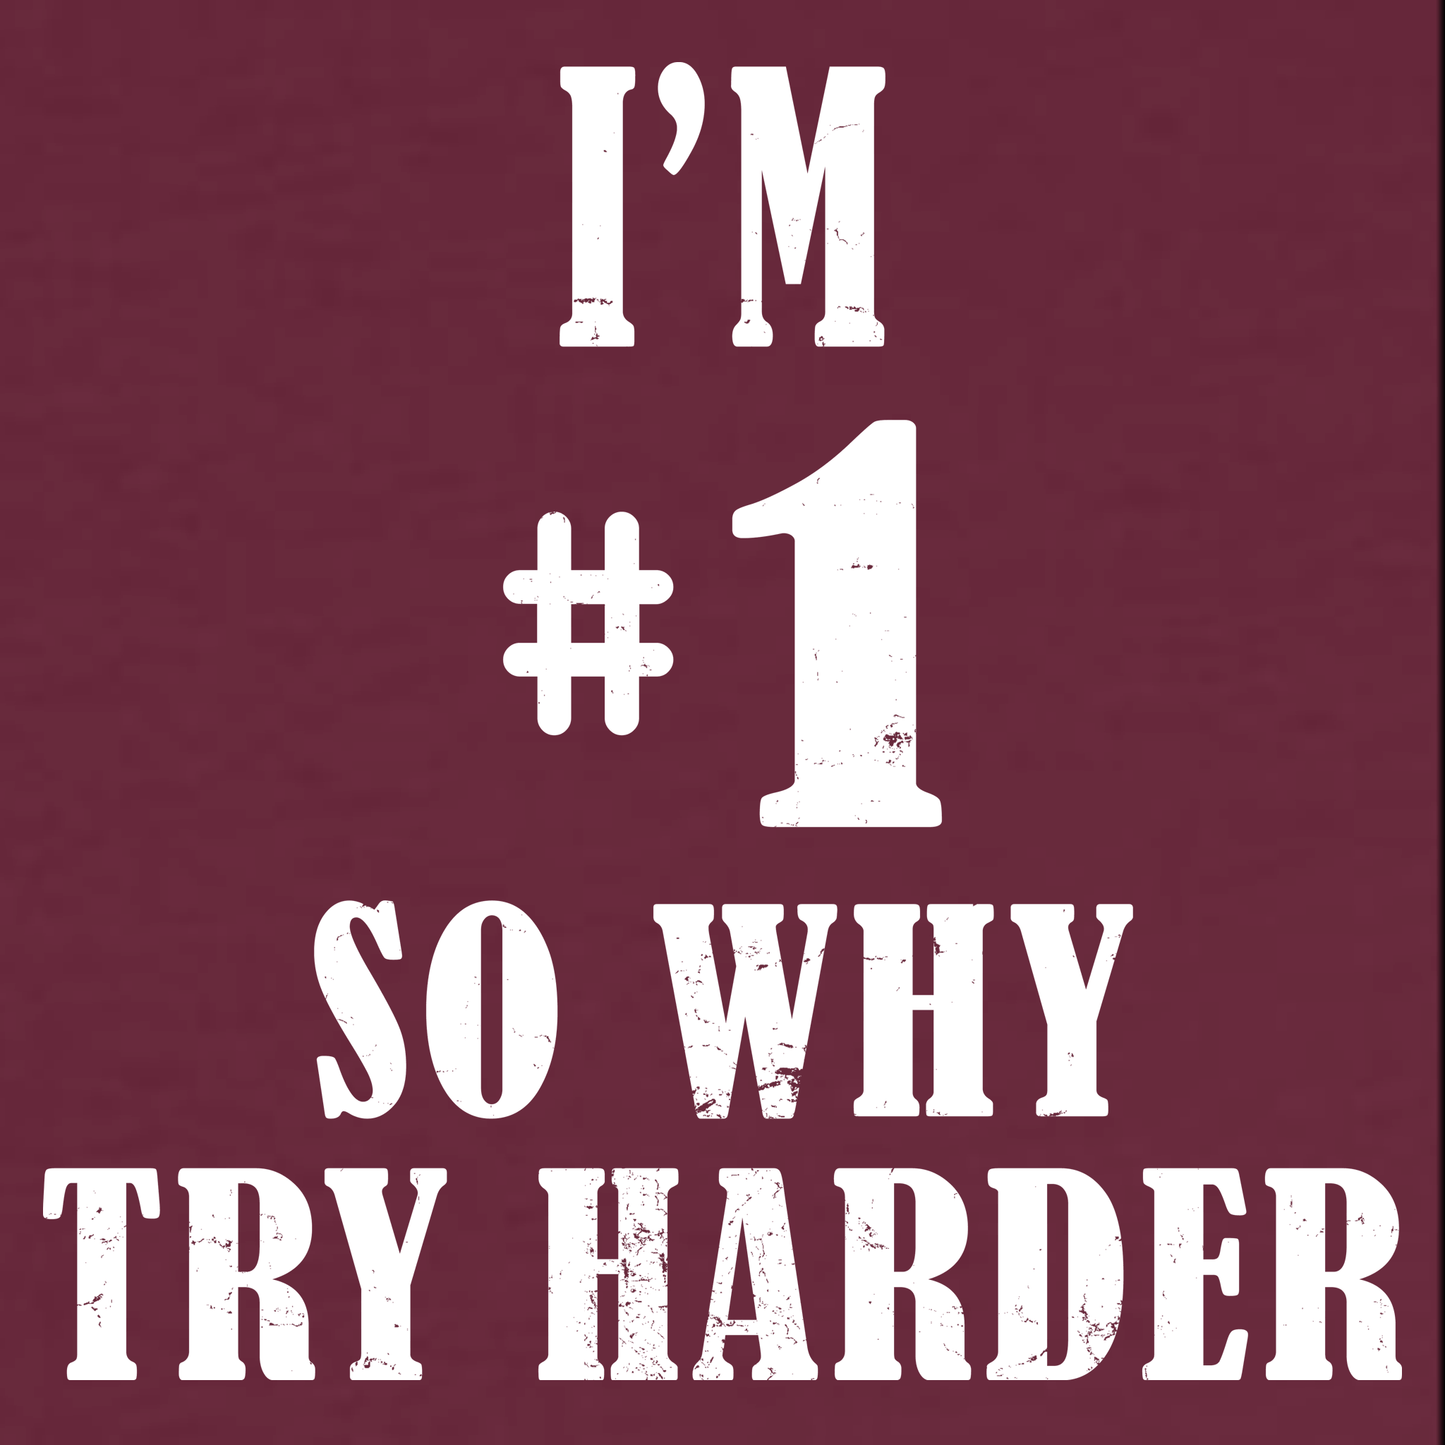 I'm #1 So Why Try Harder T-Shirt